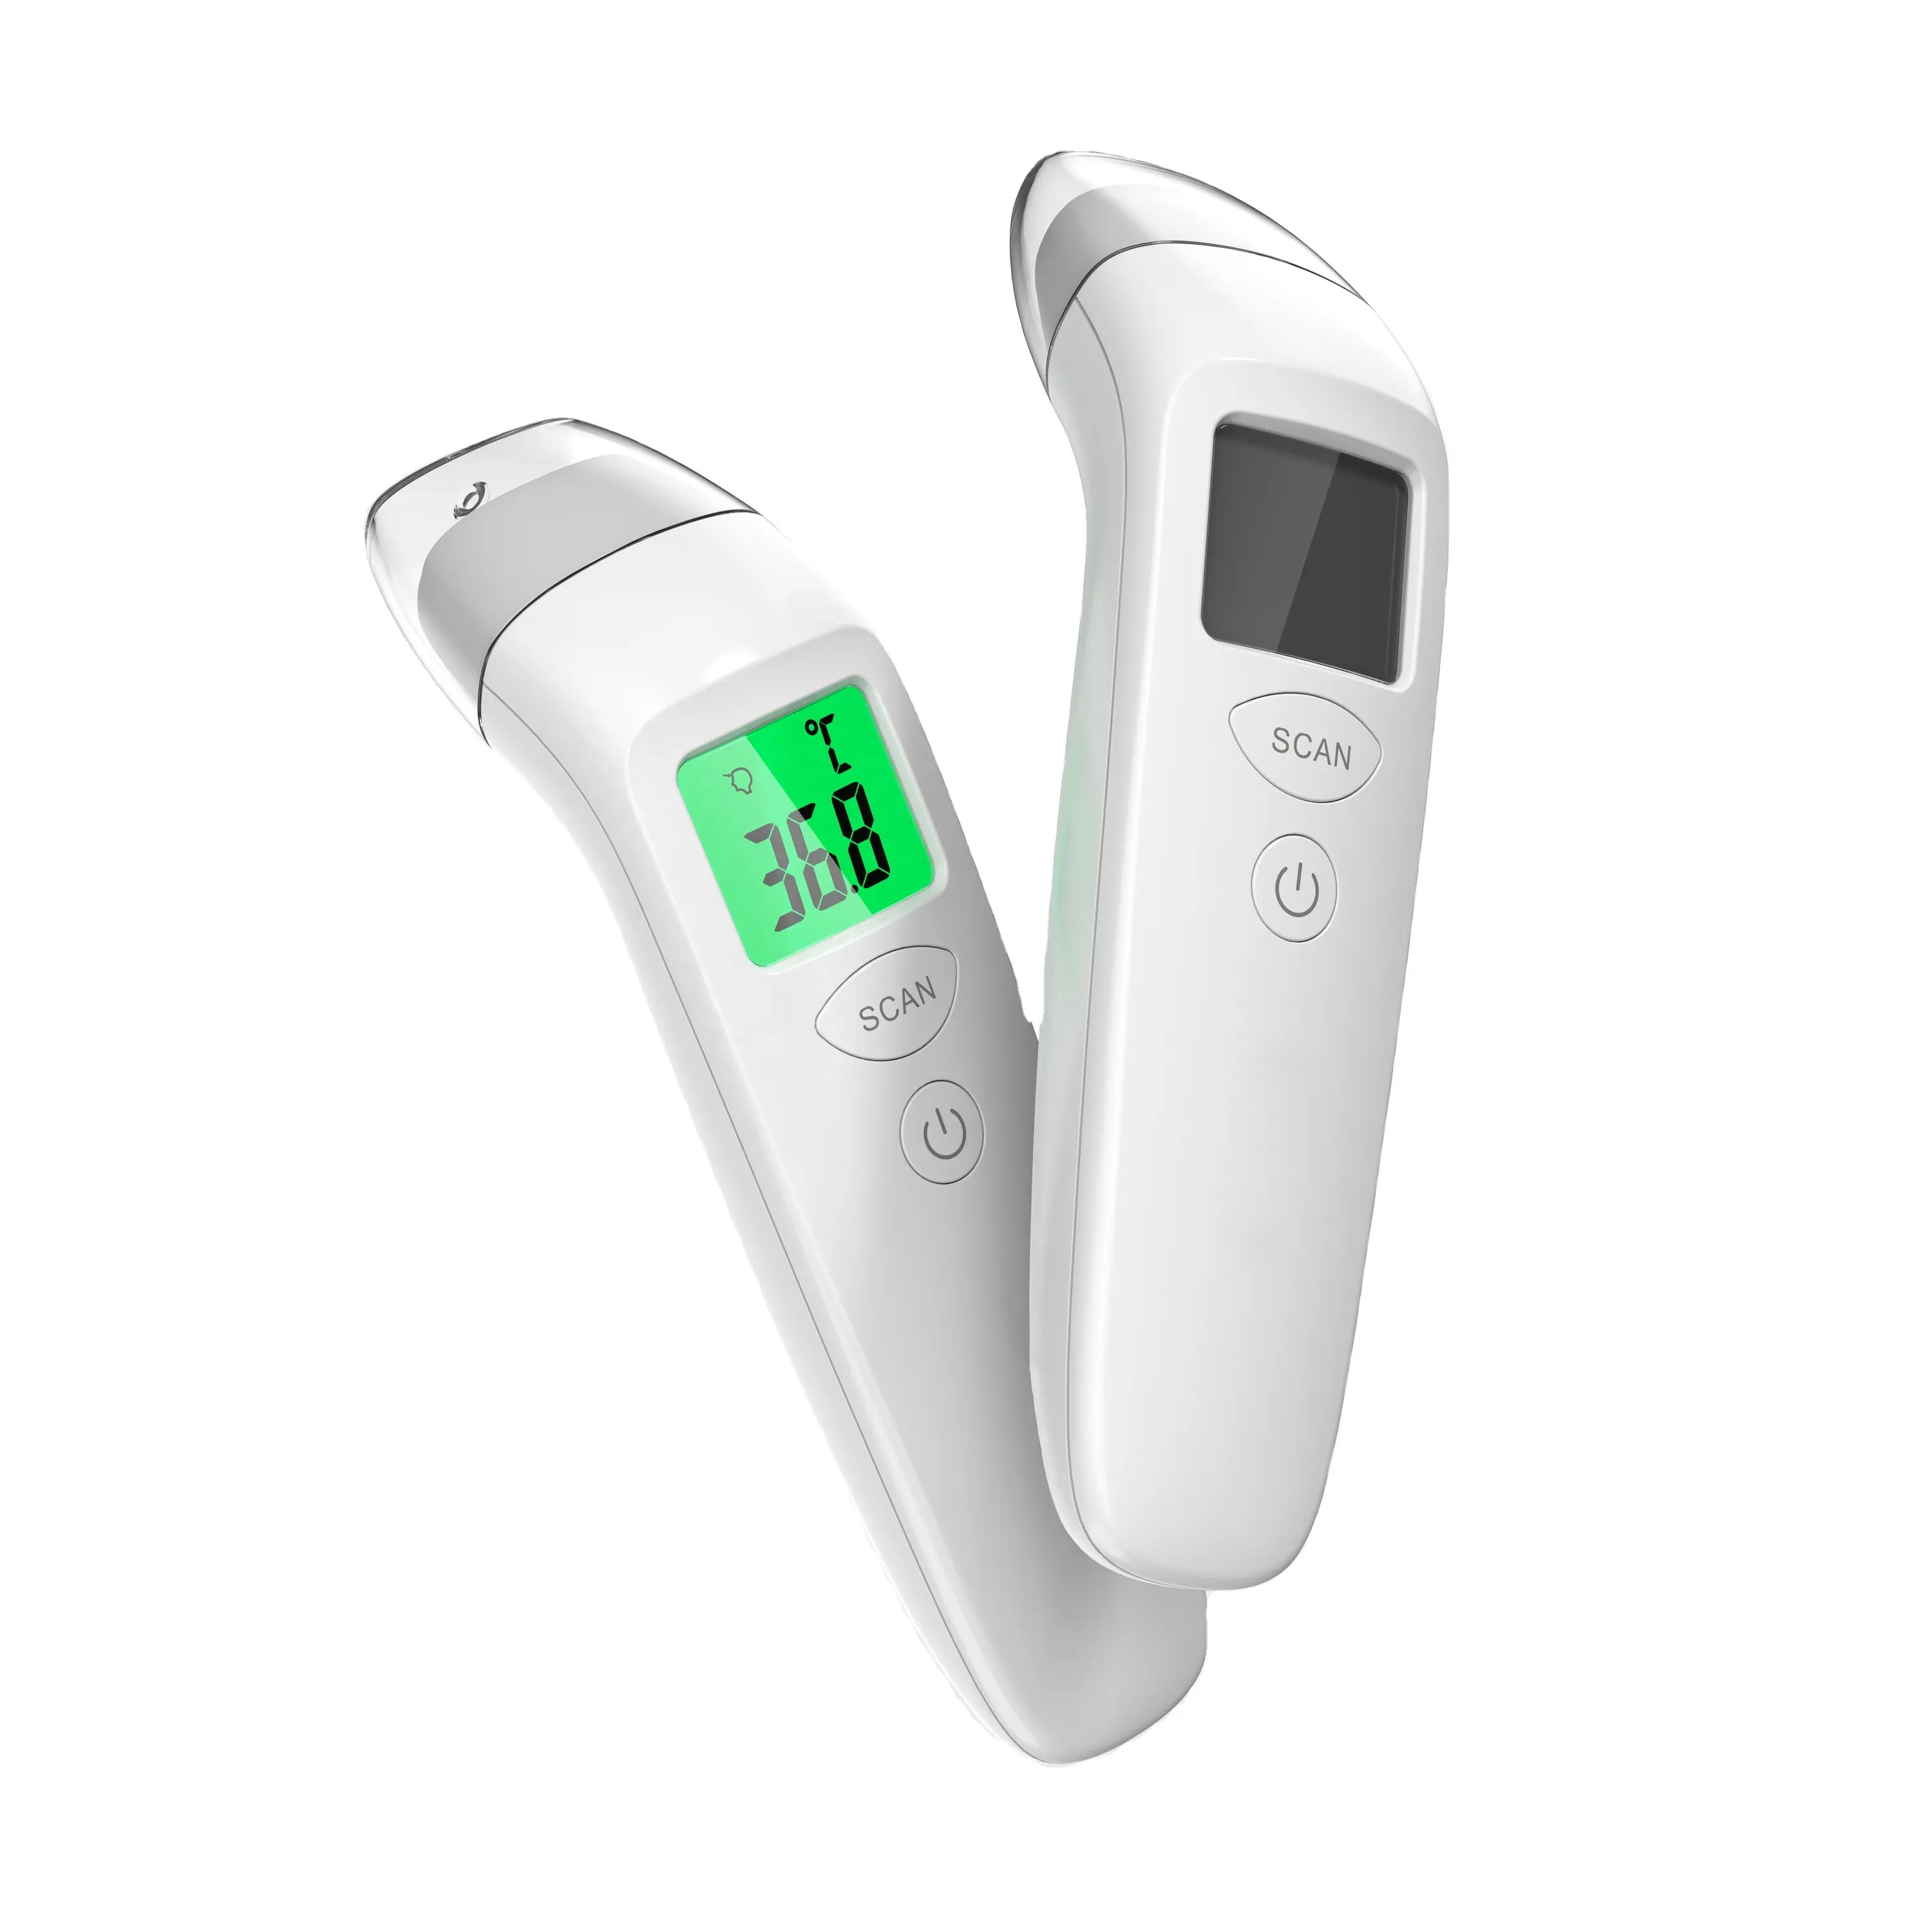 One sec CE factory design non-contact infrared frontal best medical no touch digital thermometers digital non contact